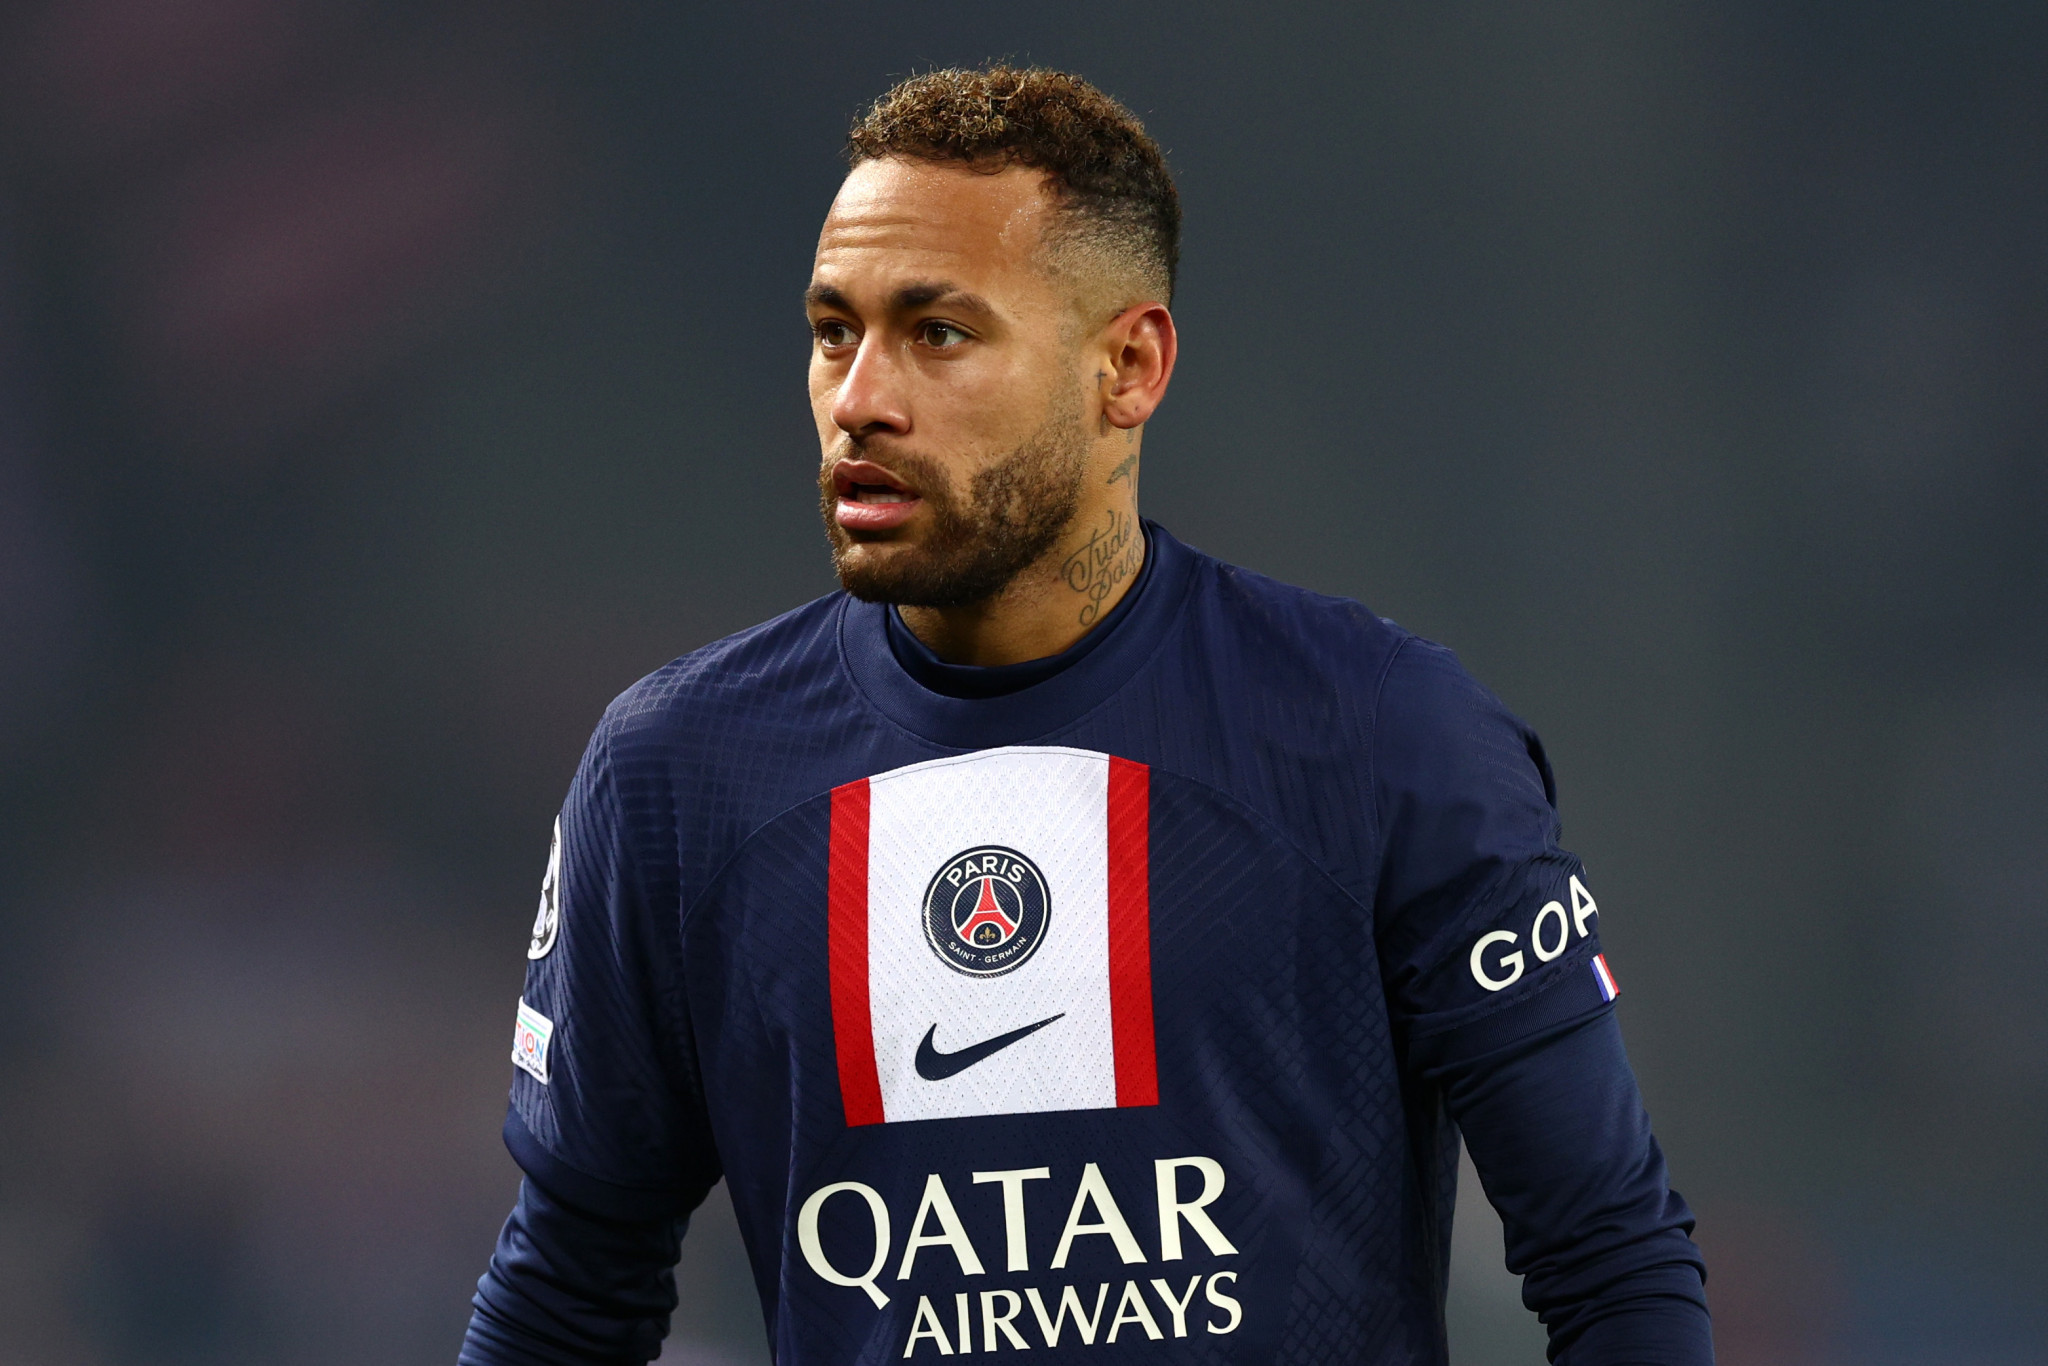 Brazilian Neymar, who plays for French team Paris Saint-Germain is one of the most followed footballers on social media ©Getty Images